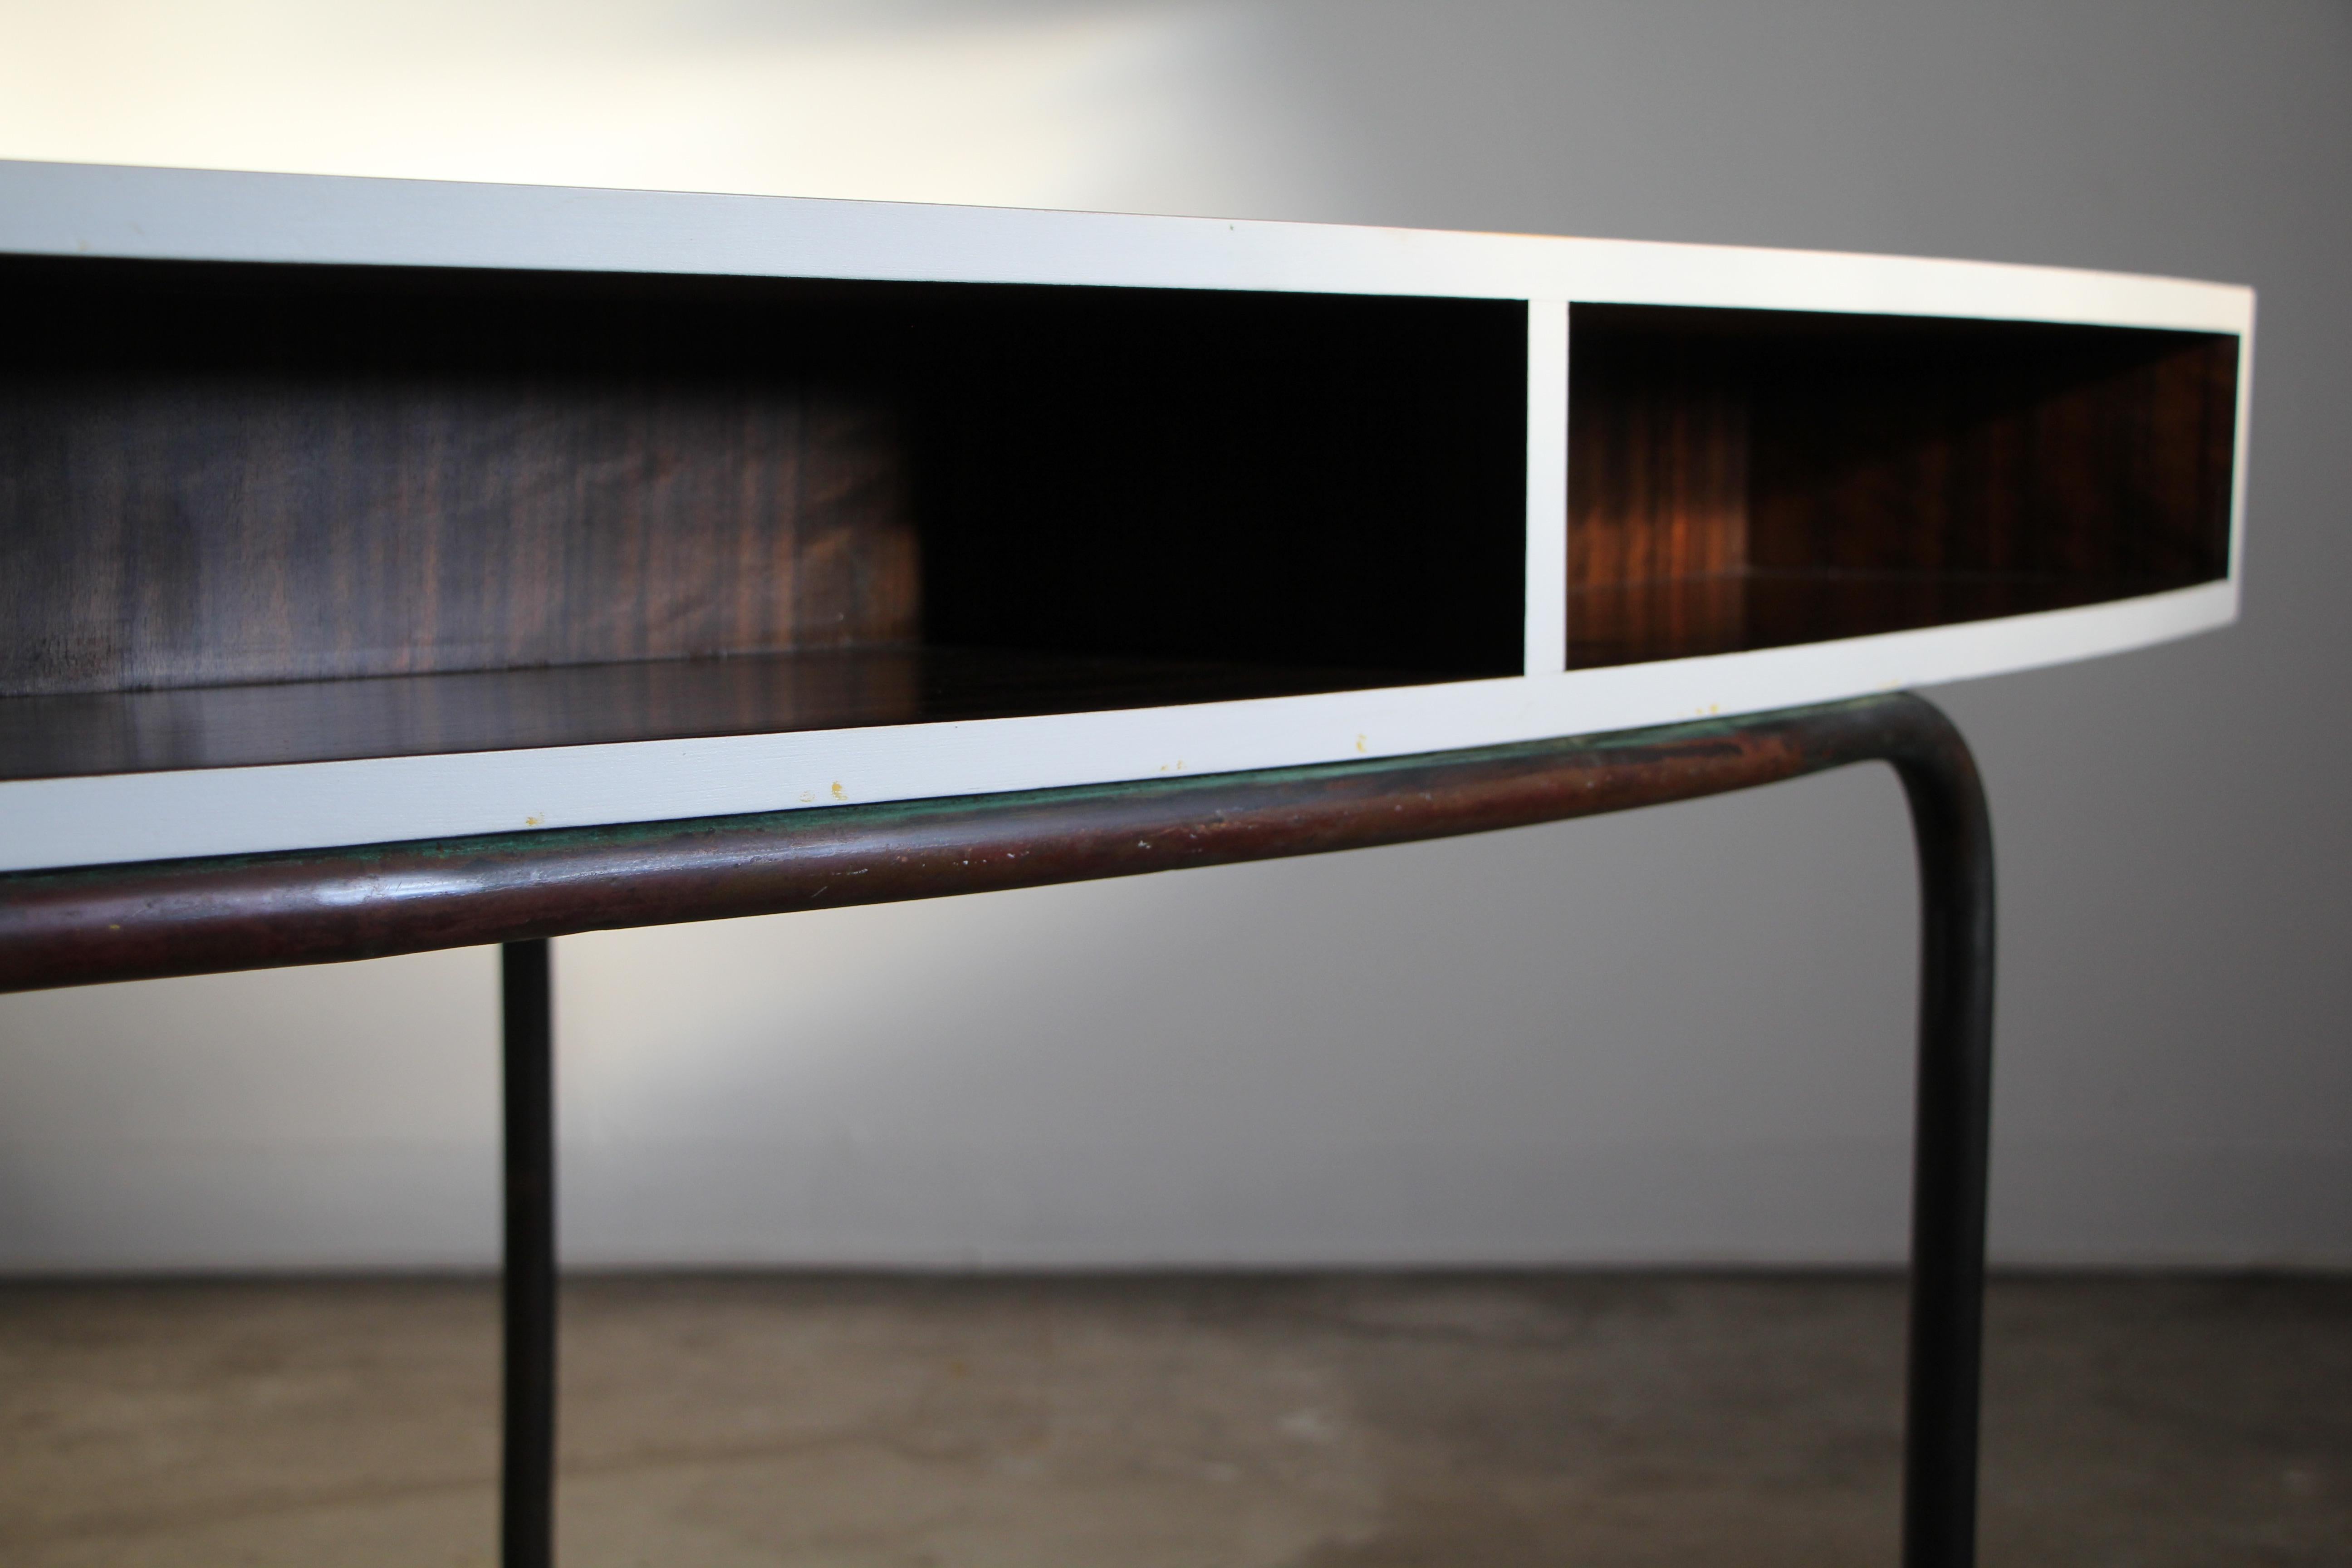 Serge Chermayeff One-of-a-Kind Curved Desk from the BBC Building 1930s For Sale 2